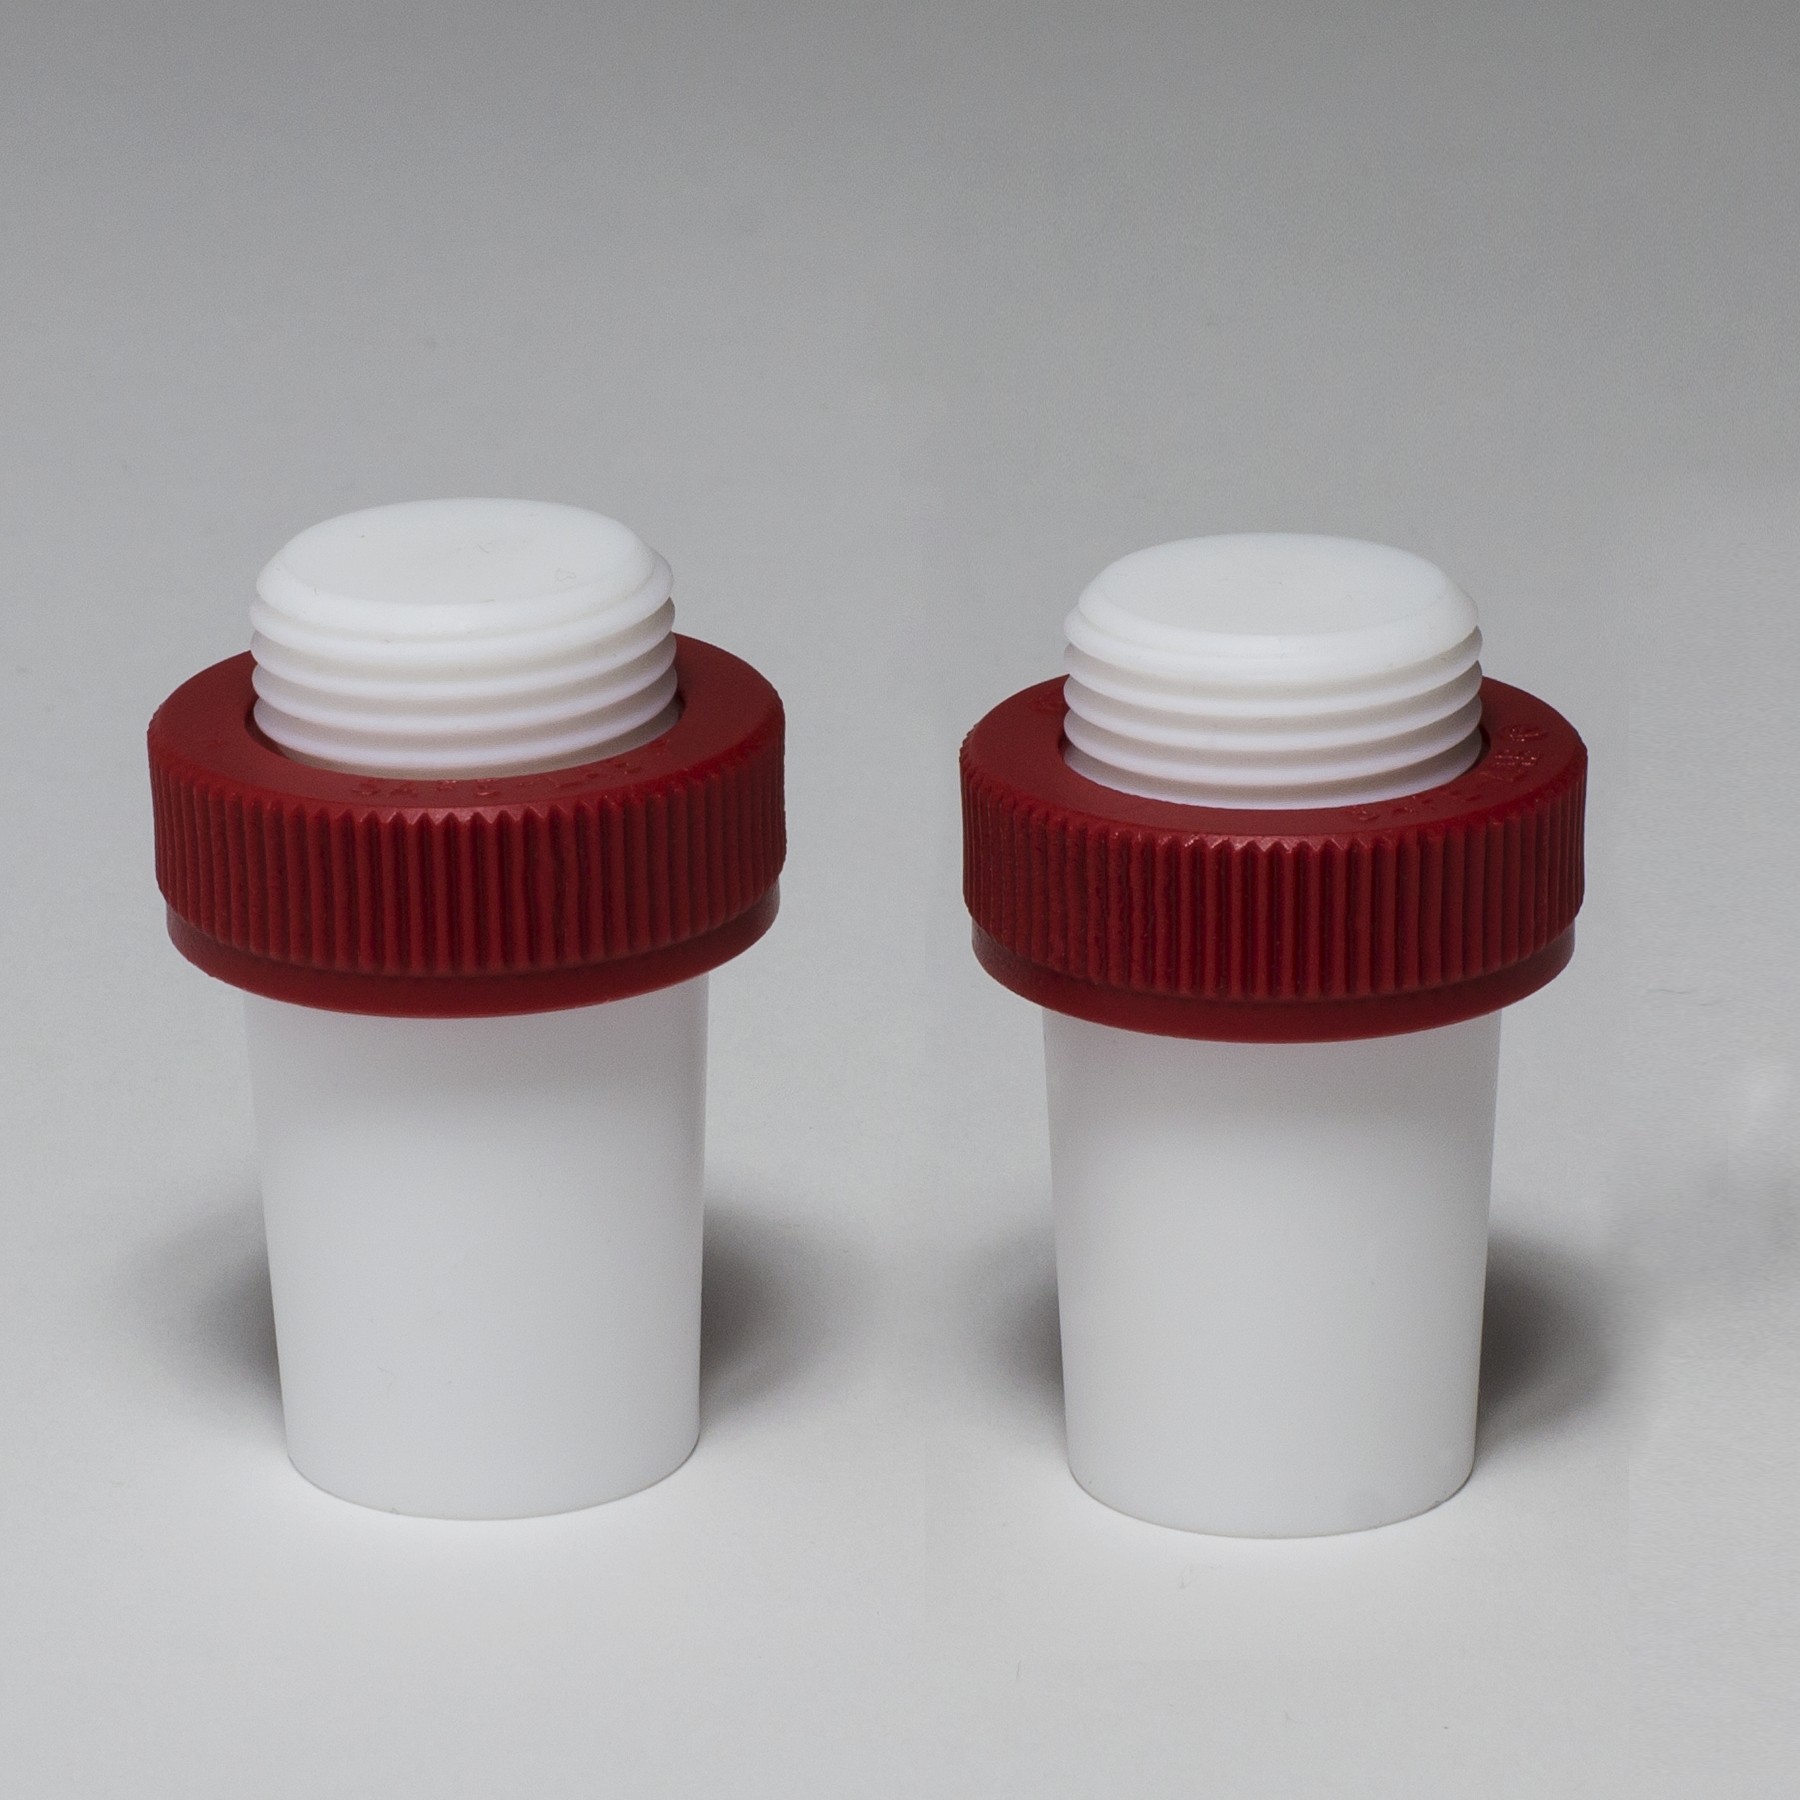 SP Bel-Art Safe-Lab Hollow Teflon PTFE Stoppers for 29/42 Tapered Joints (Pack of 2)